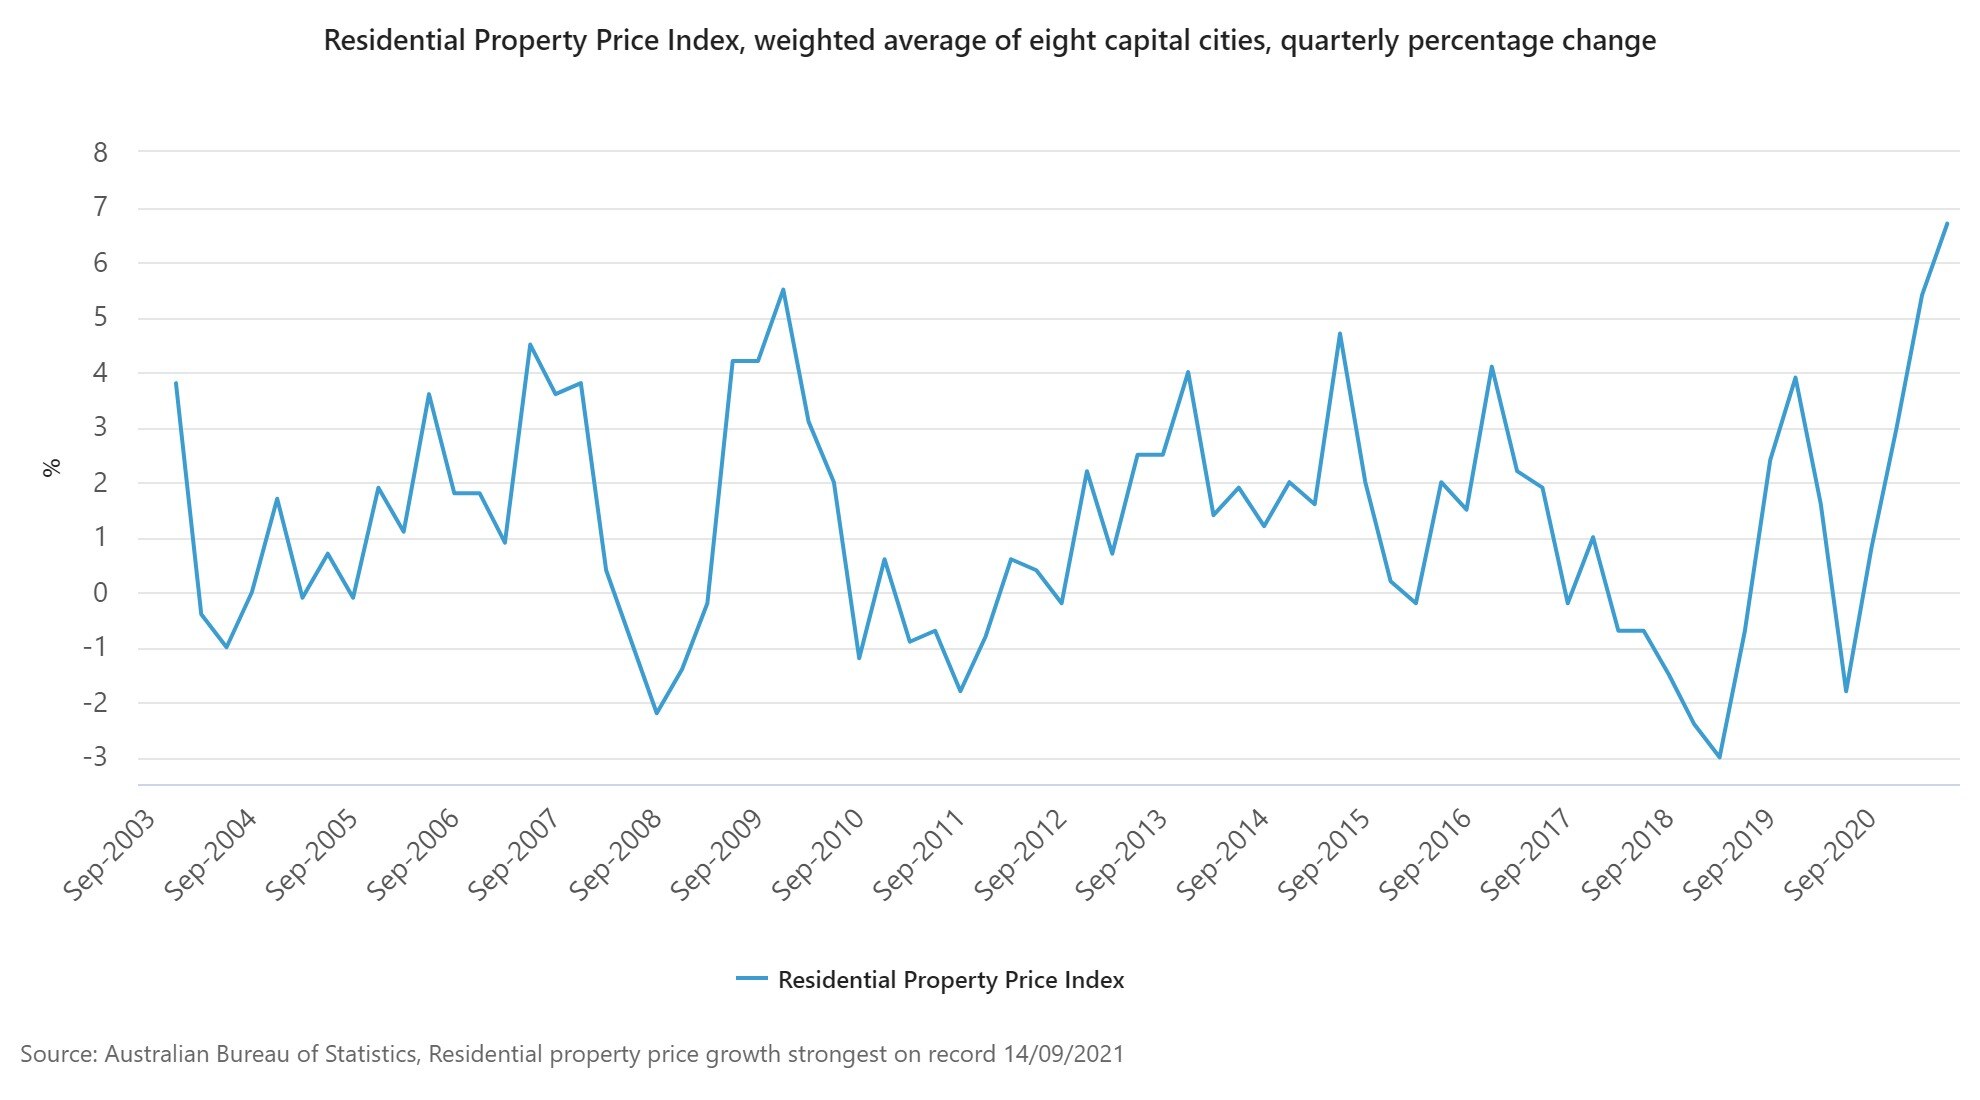 Residential Property Price Index